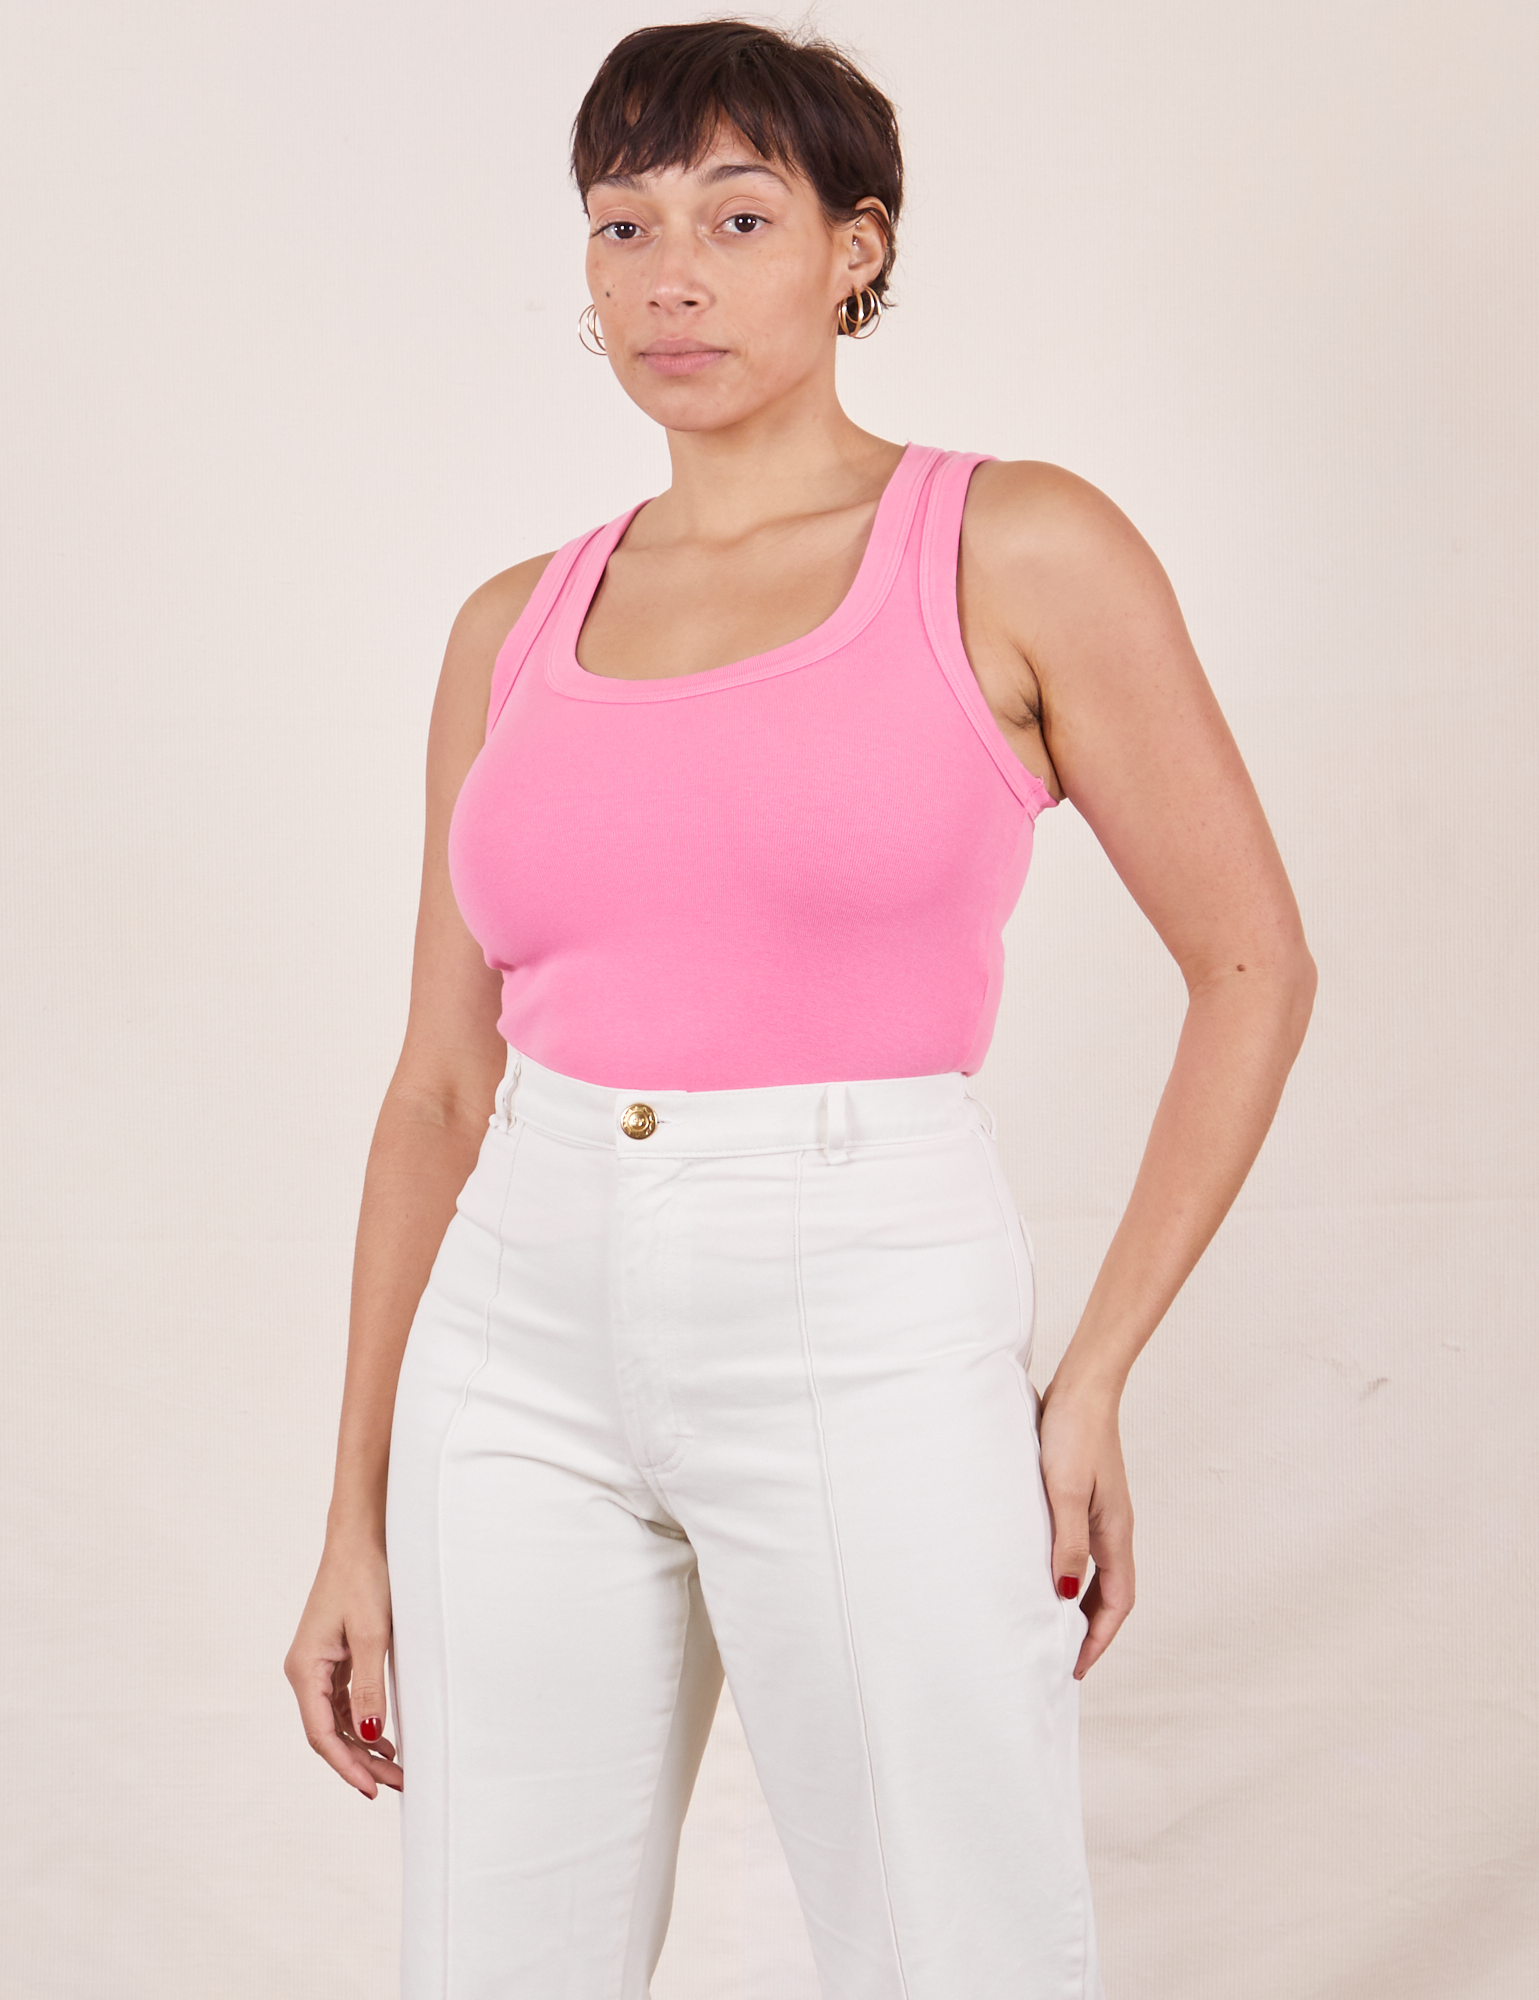 Tiara is wearing size S Tank Top in Bubblegum Pink paired with vintage off-white Western Pants